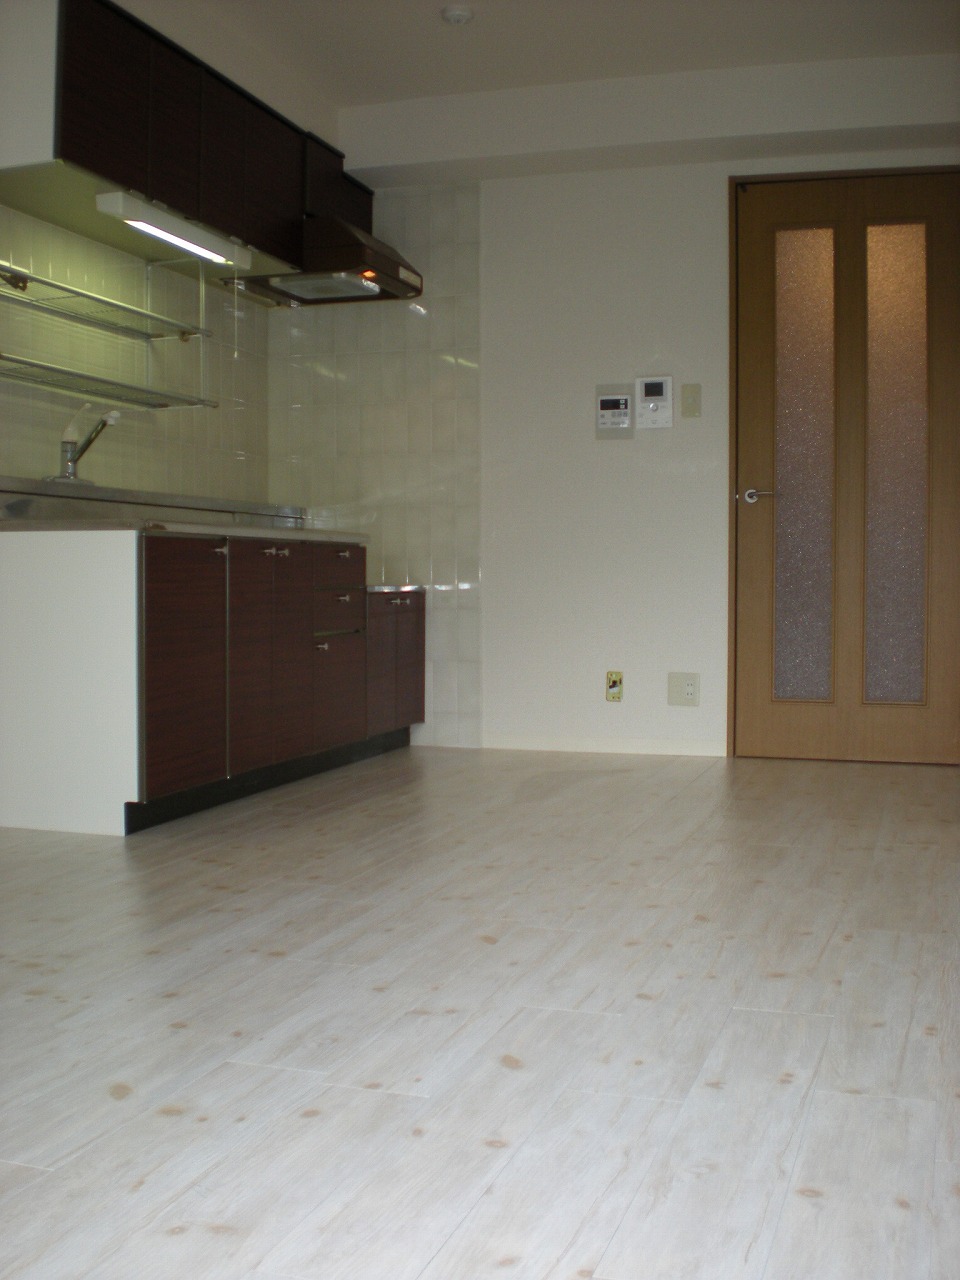 Living and room. It has been renovated to the floor tile of white keynote.